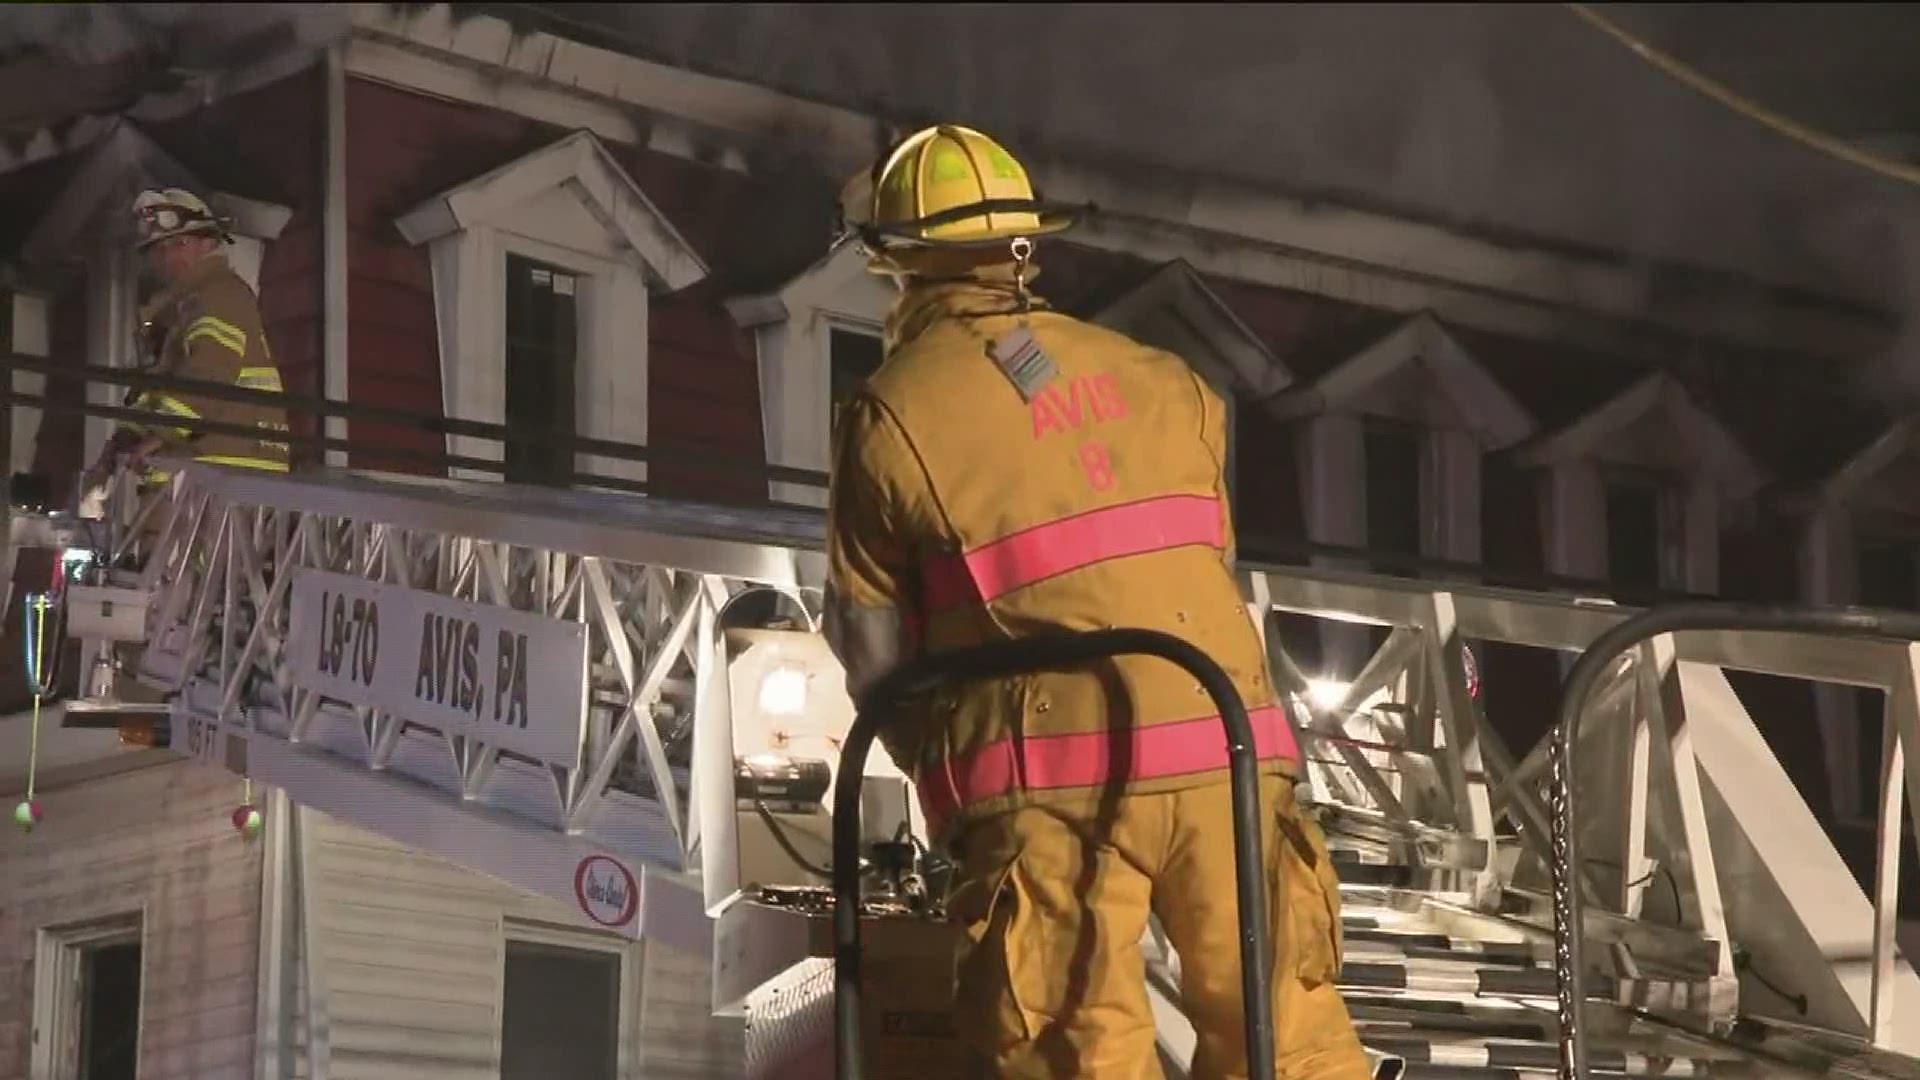 A Saturday night fire destroyed the Broadway Hotel in Jersey Shore. On Monday, we caught up with the local fire company that rescued a man from the burning building.